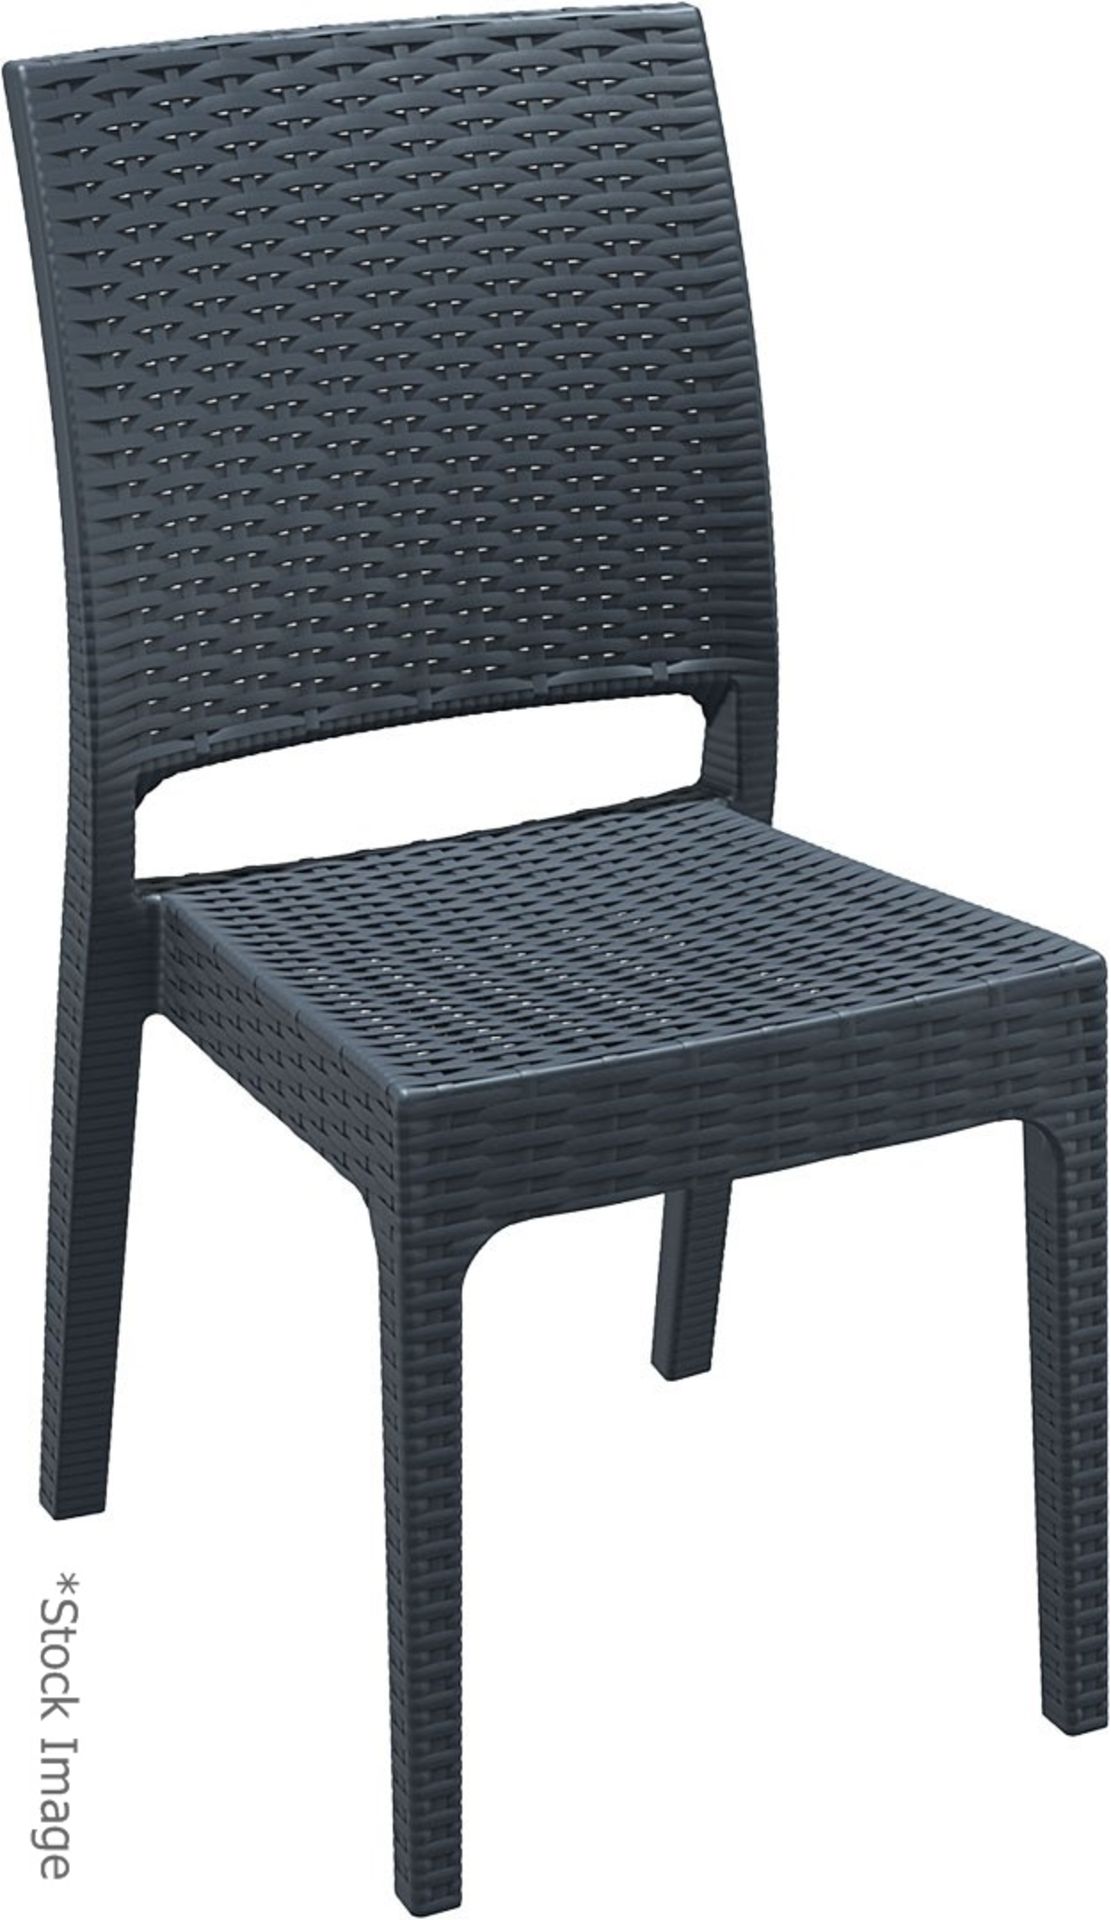 4 x Siesta 'Florida' Rattan Style Garden Chairs In Dark Grey - Suitable For Commercial or Home Use - - Image 15 of 21